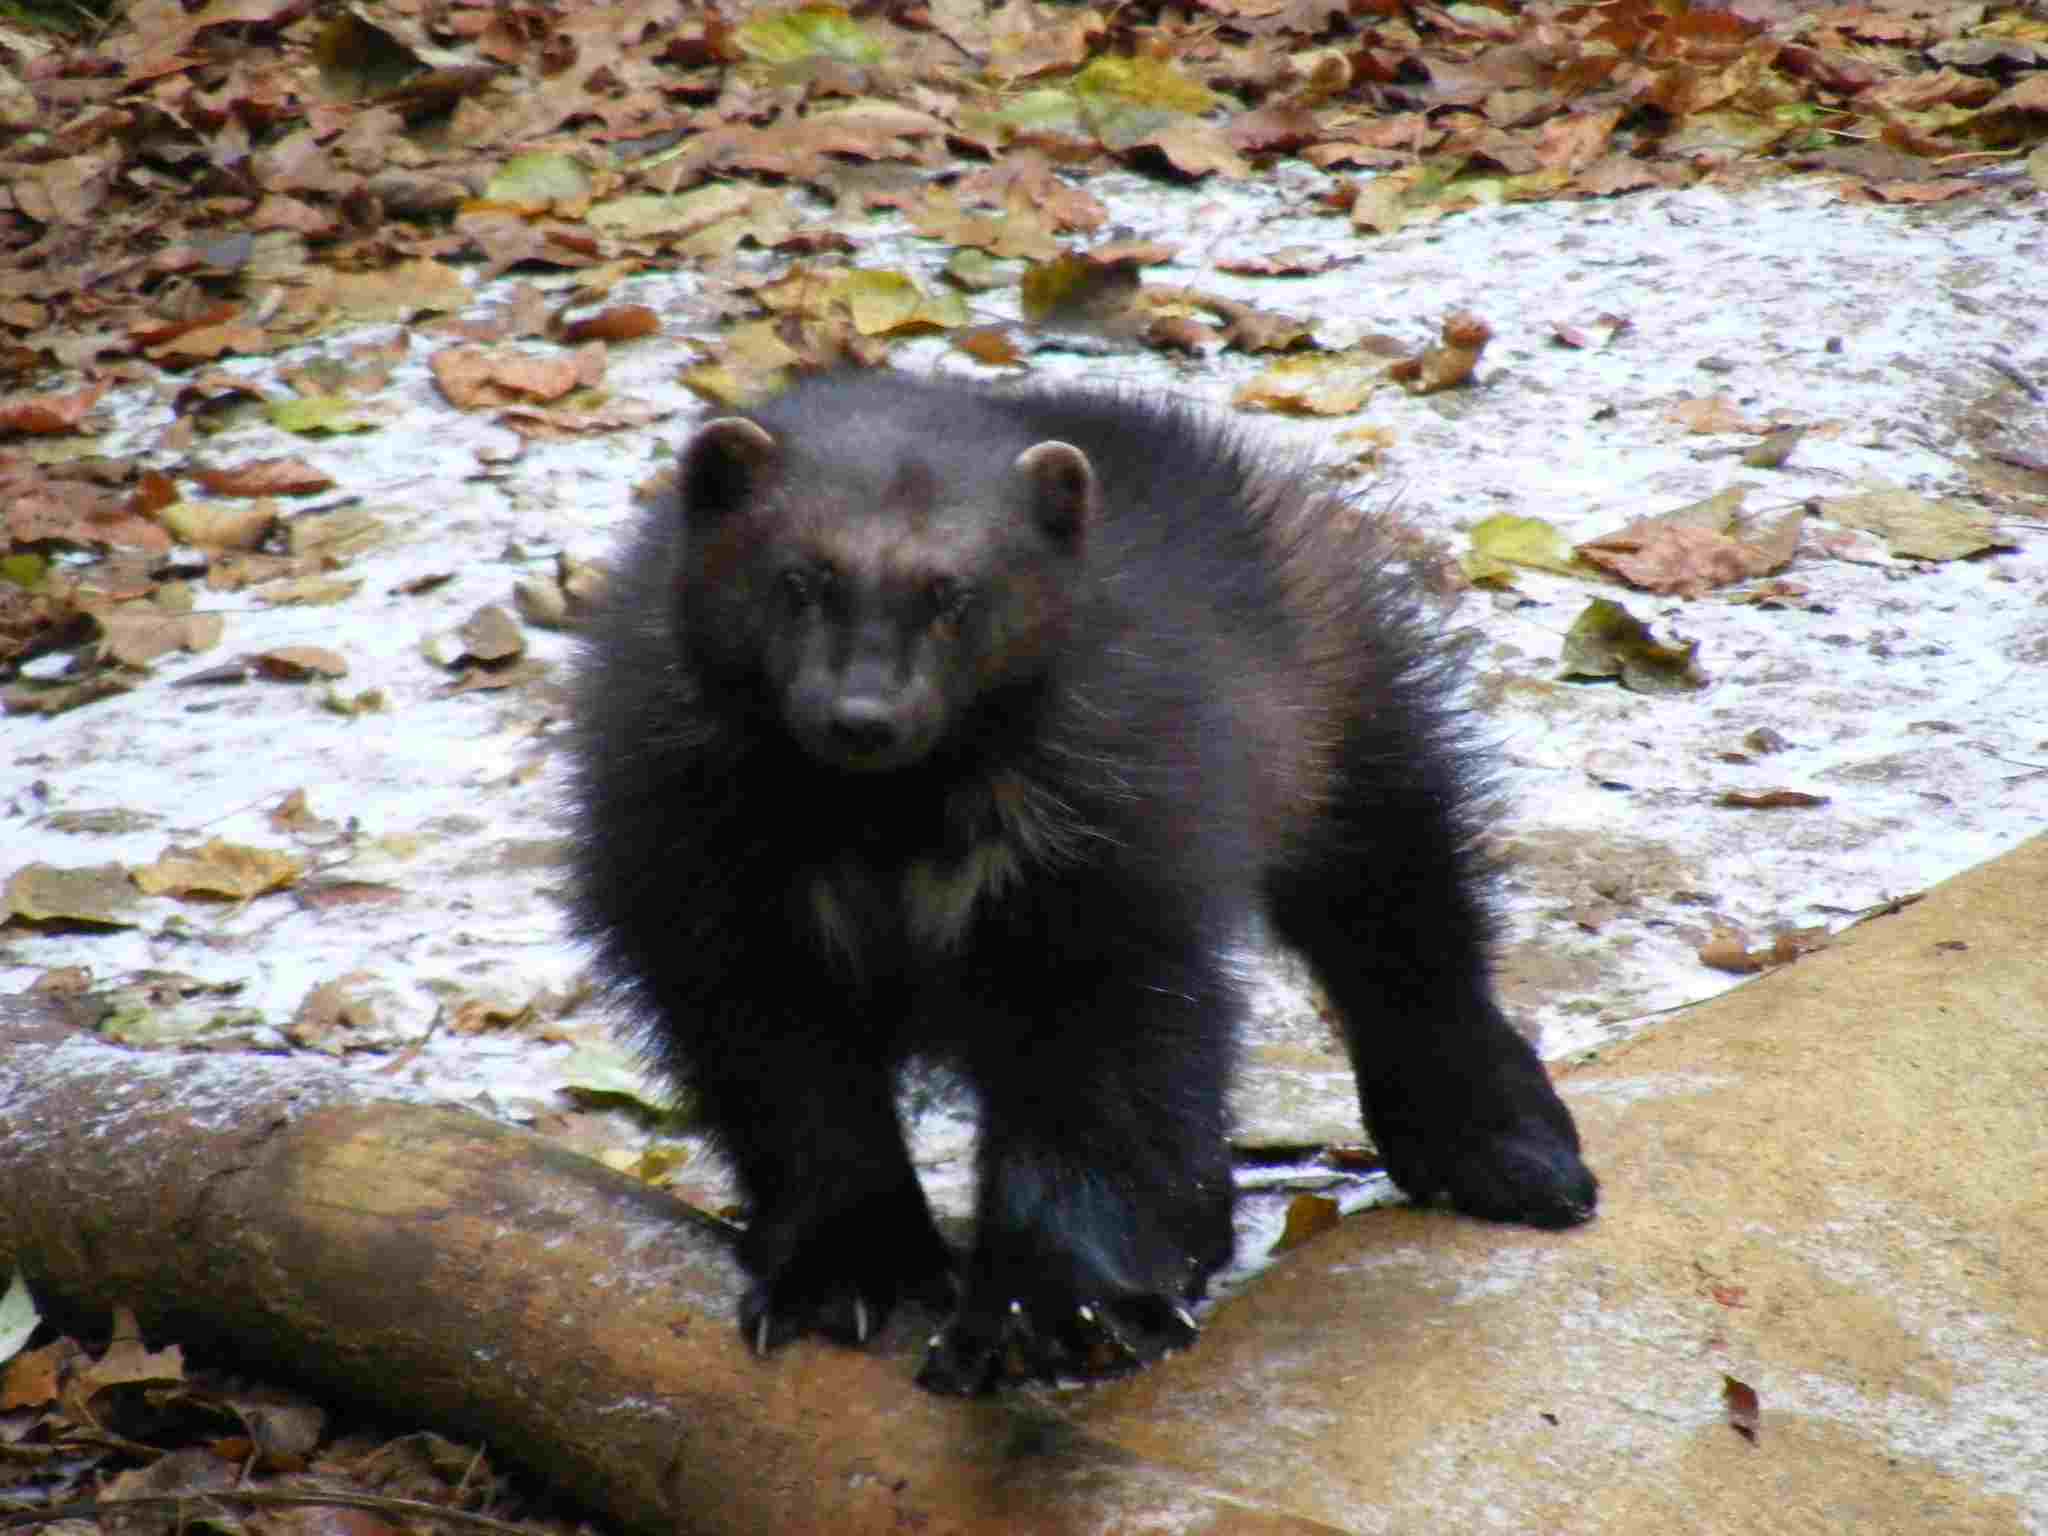 Wolverine Vs Tasmanian Devil: The Tundra is Often Inhabited by Wolverines (Credit: Marie Hale 2010 .CC BY 2.0.)